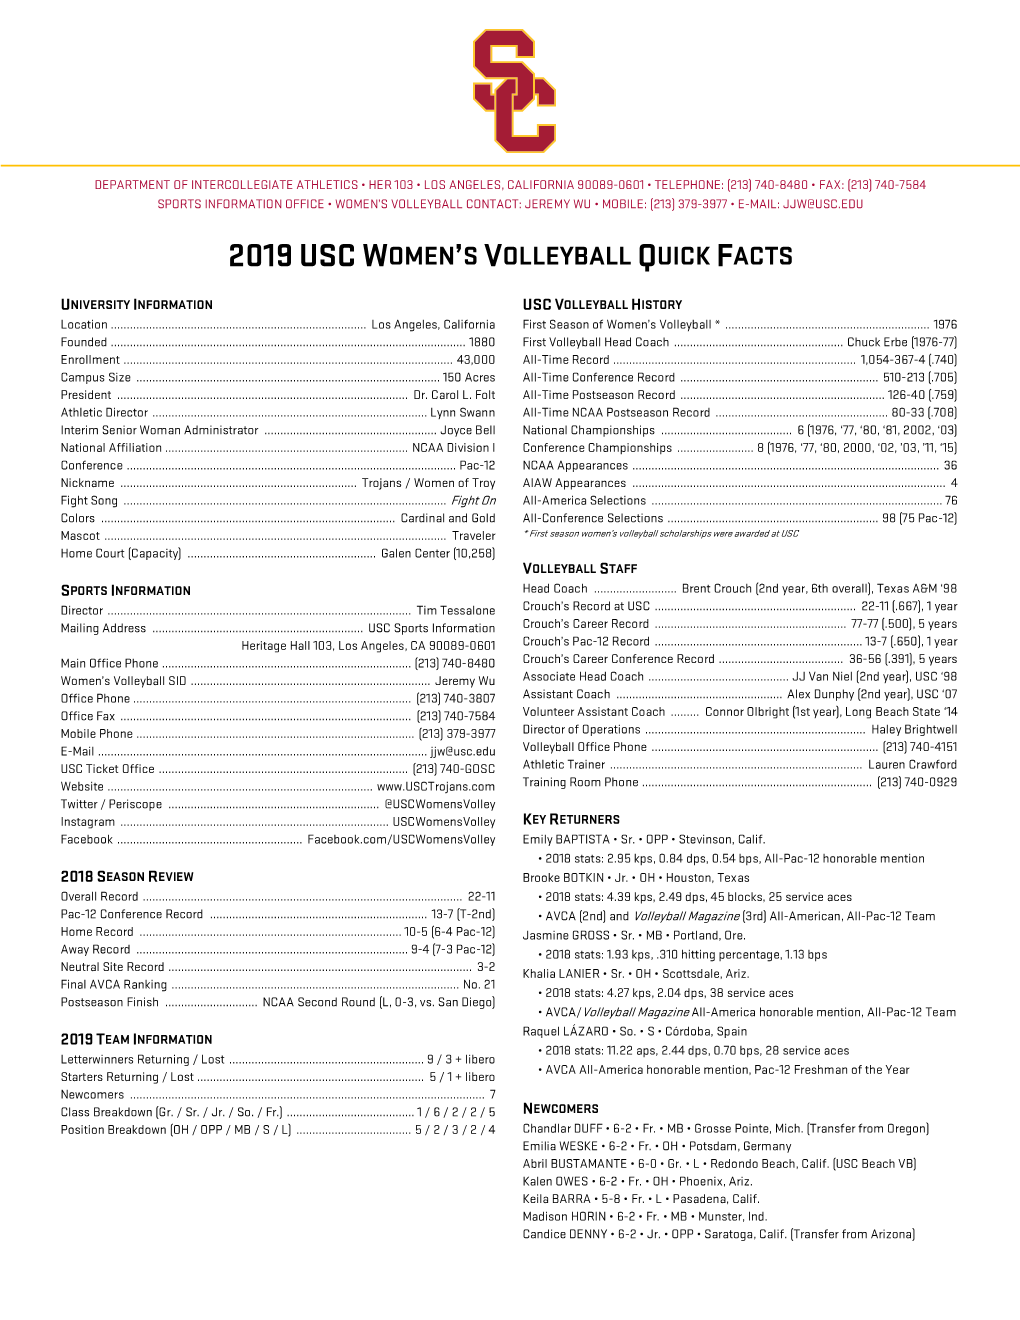 2019 USC WVB Quick Facts